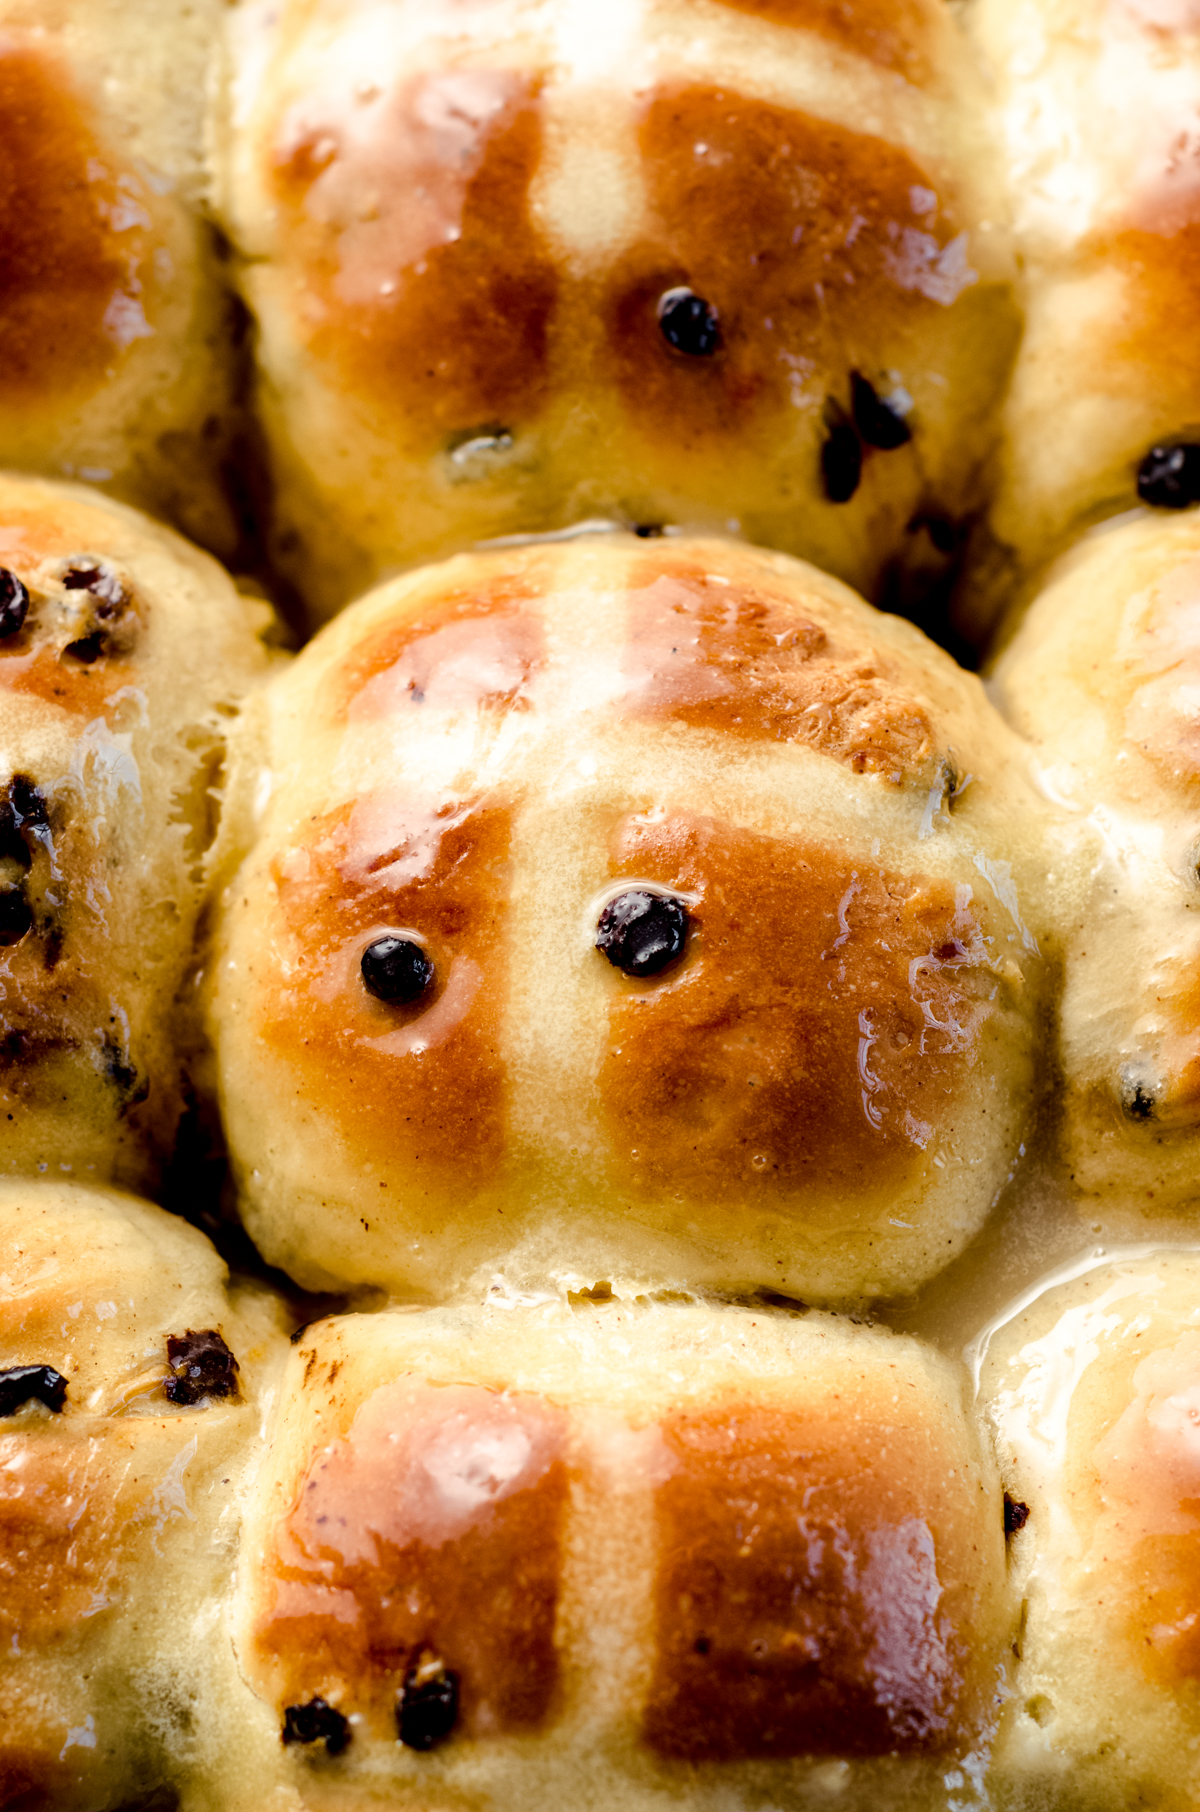 Aerial photo of hot cross buns in a pan.